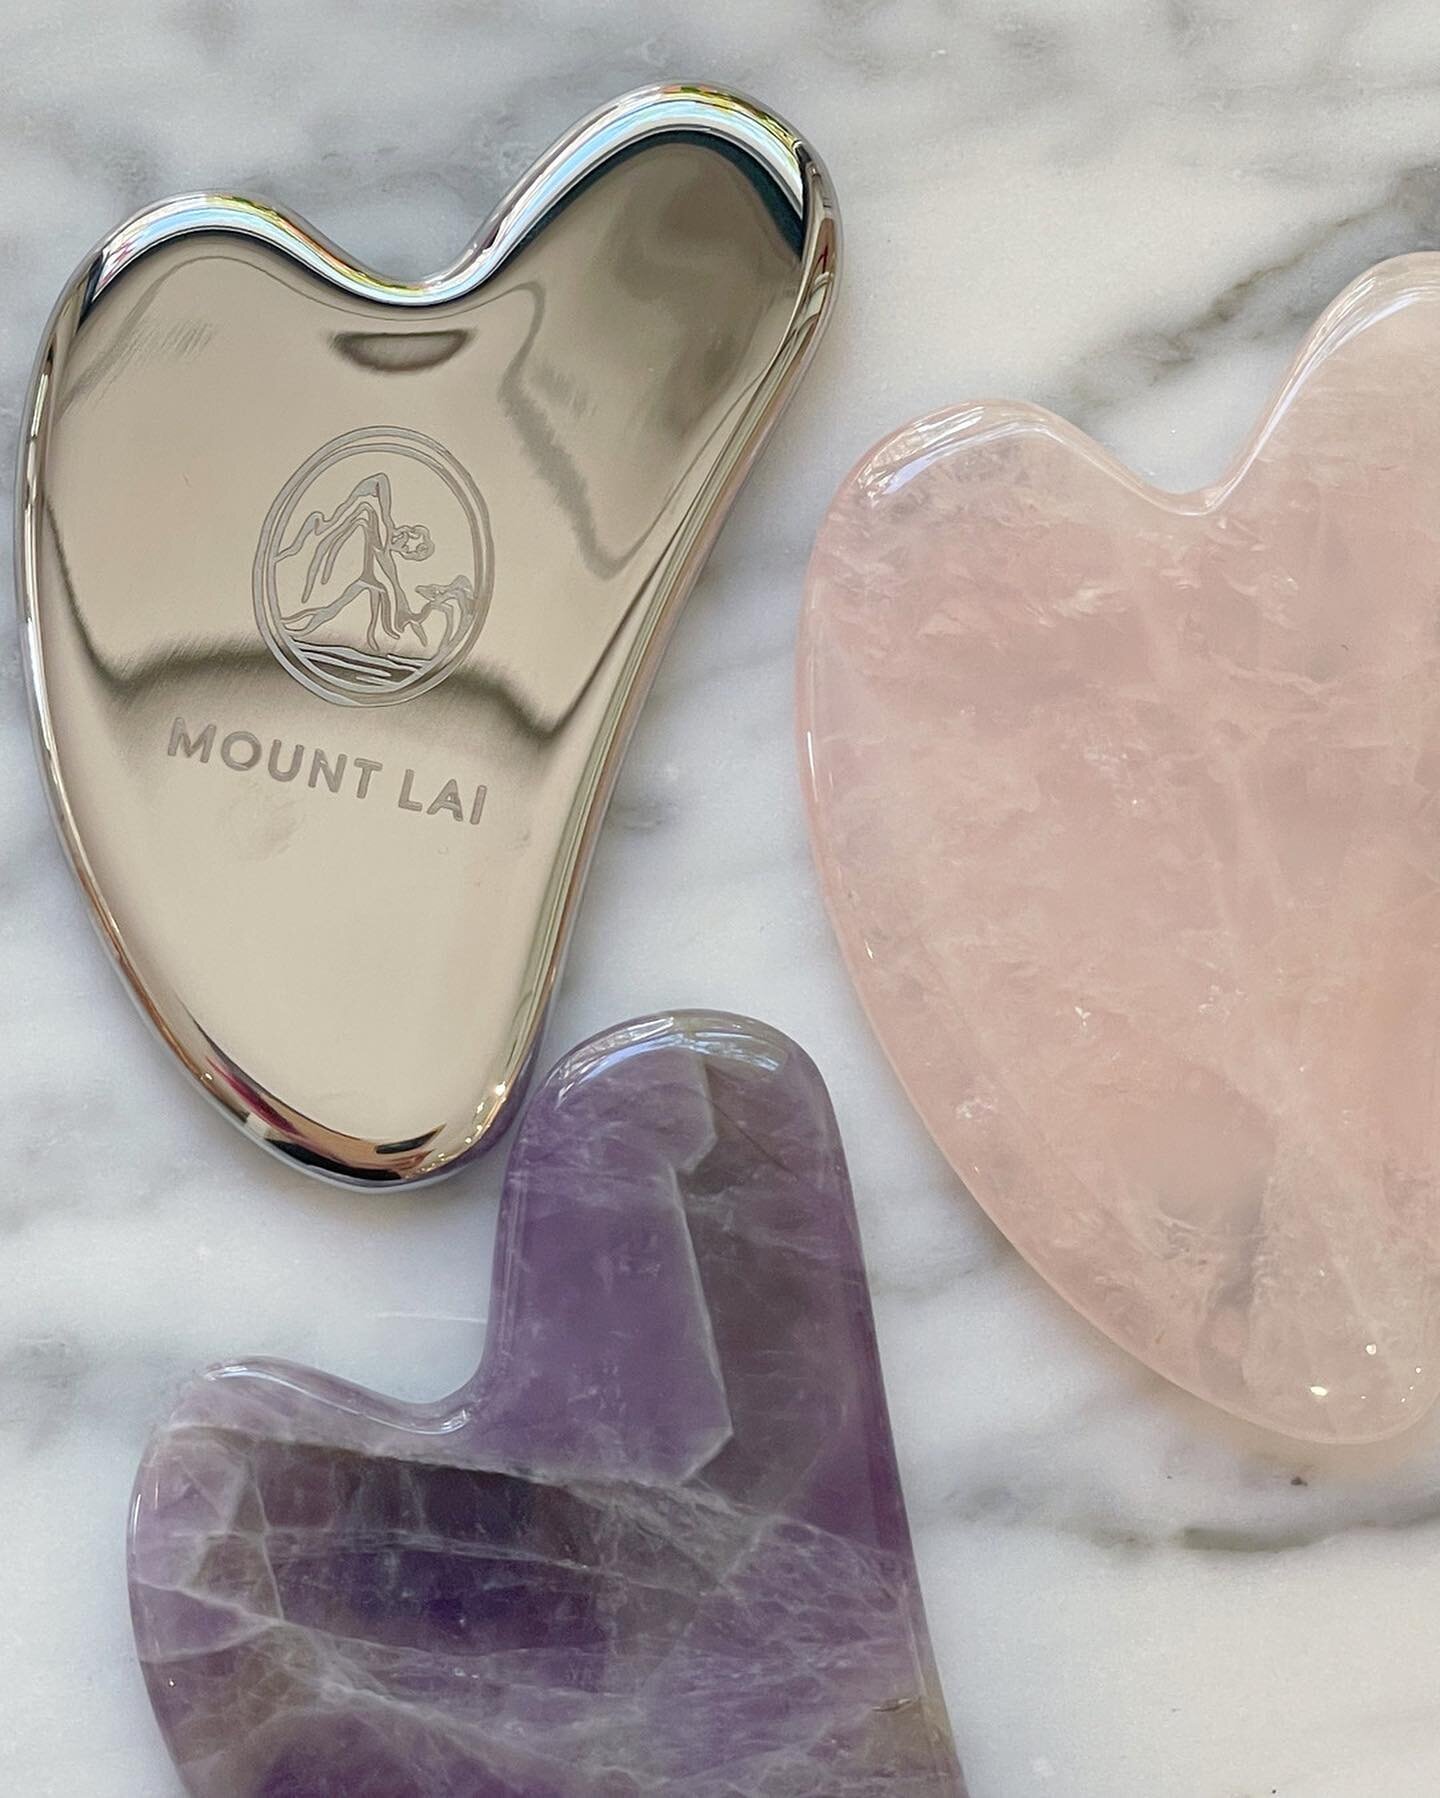 Gua sha stones are some of our favorite beauty tools! 💋
⠀⠀⠀⠀⠀⠀⠀⠀⠀
Have you added this ancient healing remedy to your morning or evening routine?
⠀⠀⠀⠀⠀⠀⠀⠀⠀
Come by for a quick tutorial, we love chatting all things beauty! 💄❣️
⠀⠀⠀⠀⠀⠀⠀⠀⠀
⠀⠀⠀⠀⠀⠀⠀⠀⠀
⠀⠀⠀